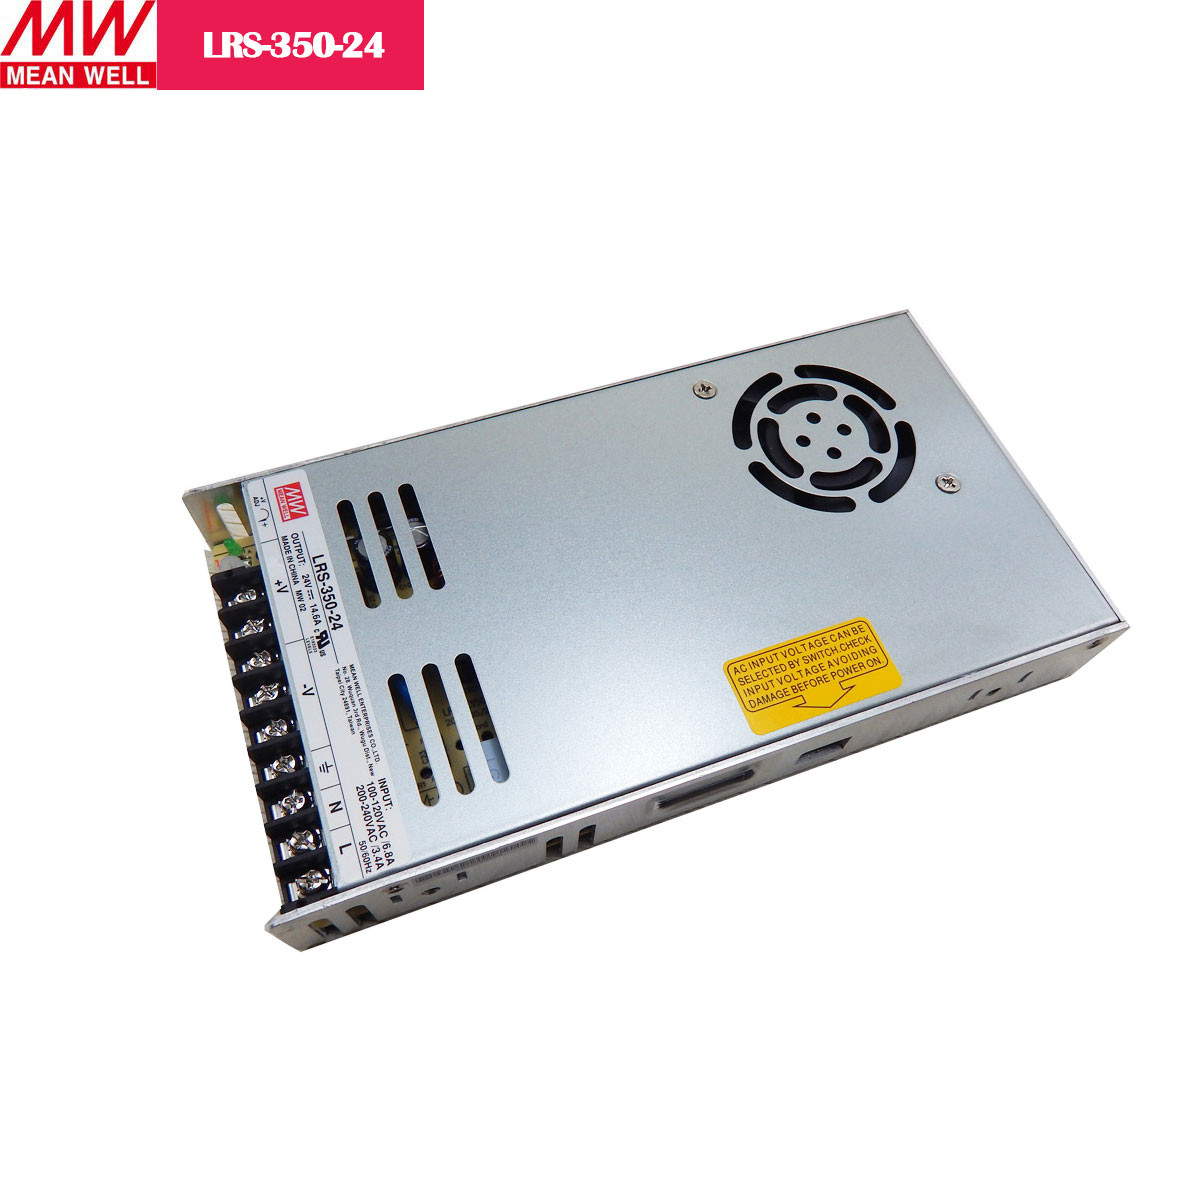 24V 14.6Amp 350.4W MEANWELL UL Certificated LRS series Switching Power Supply